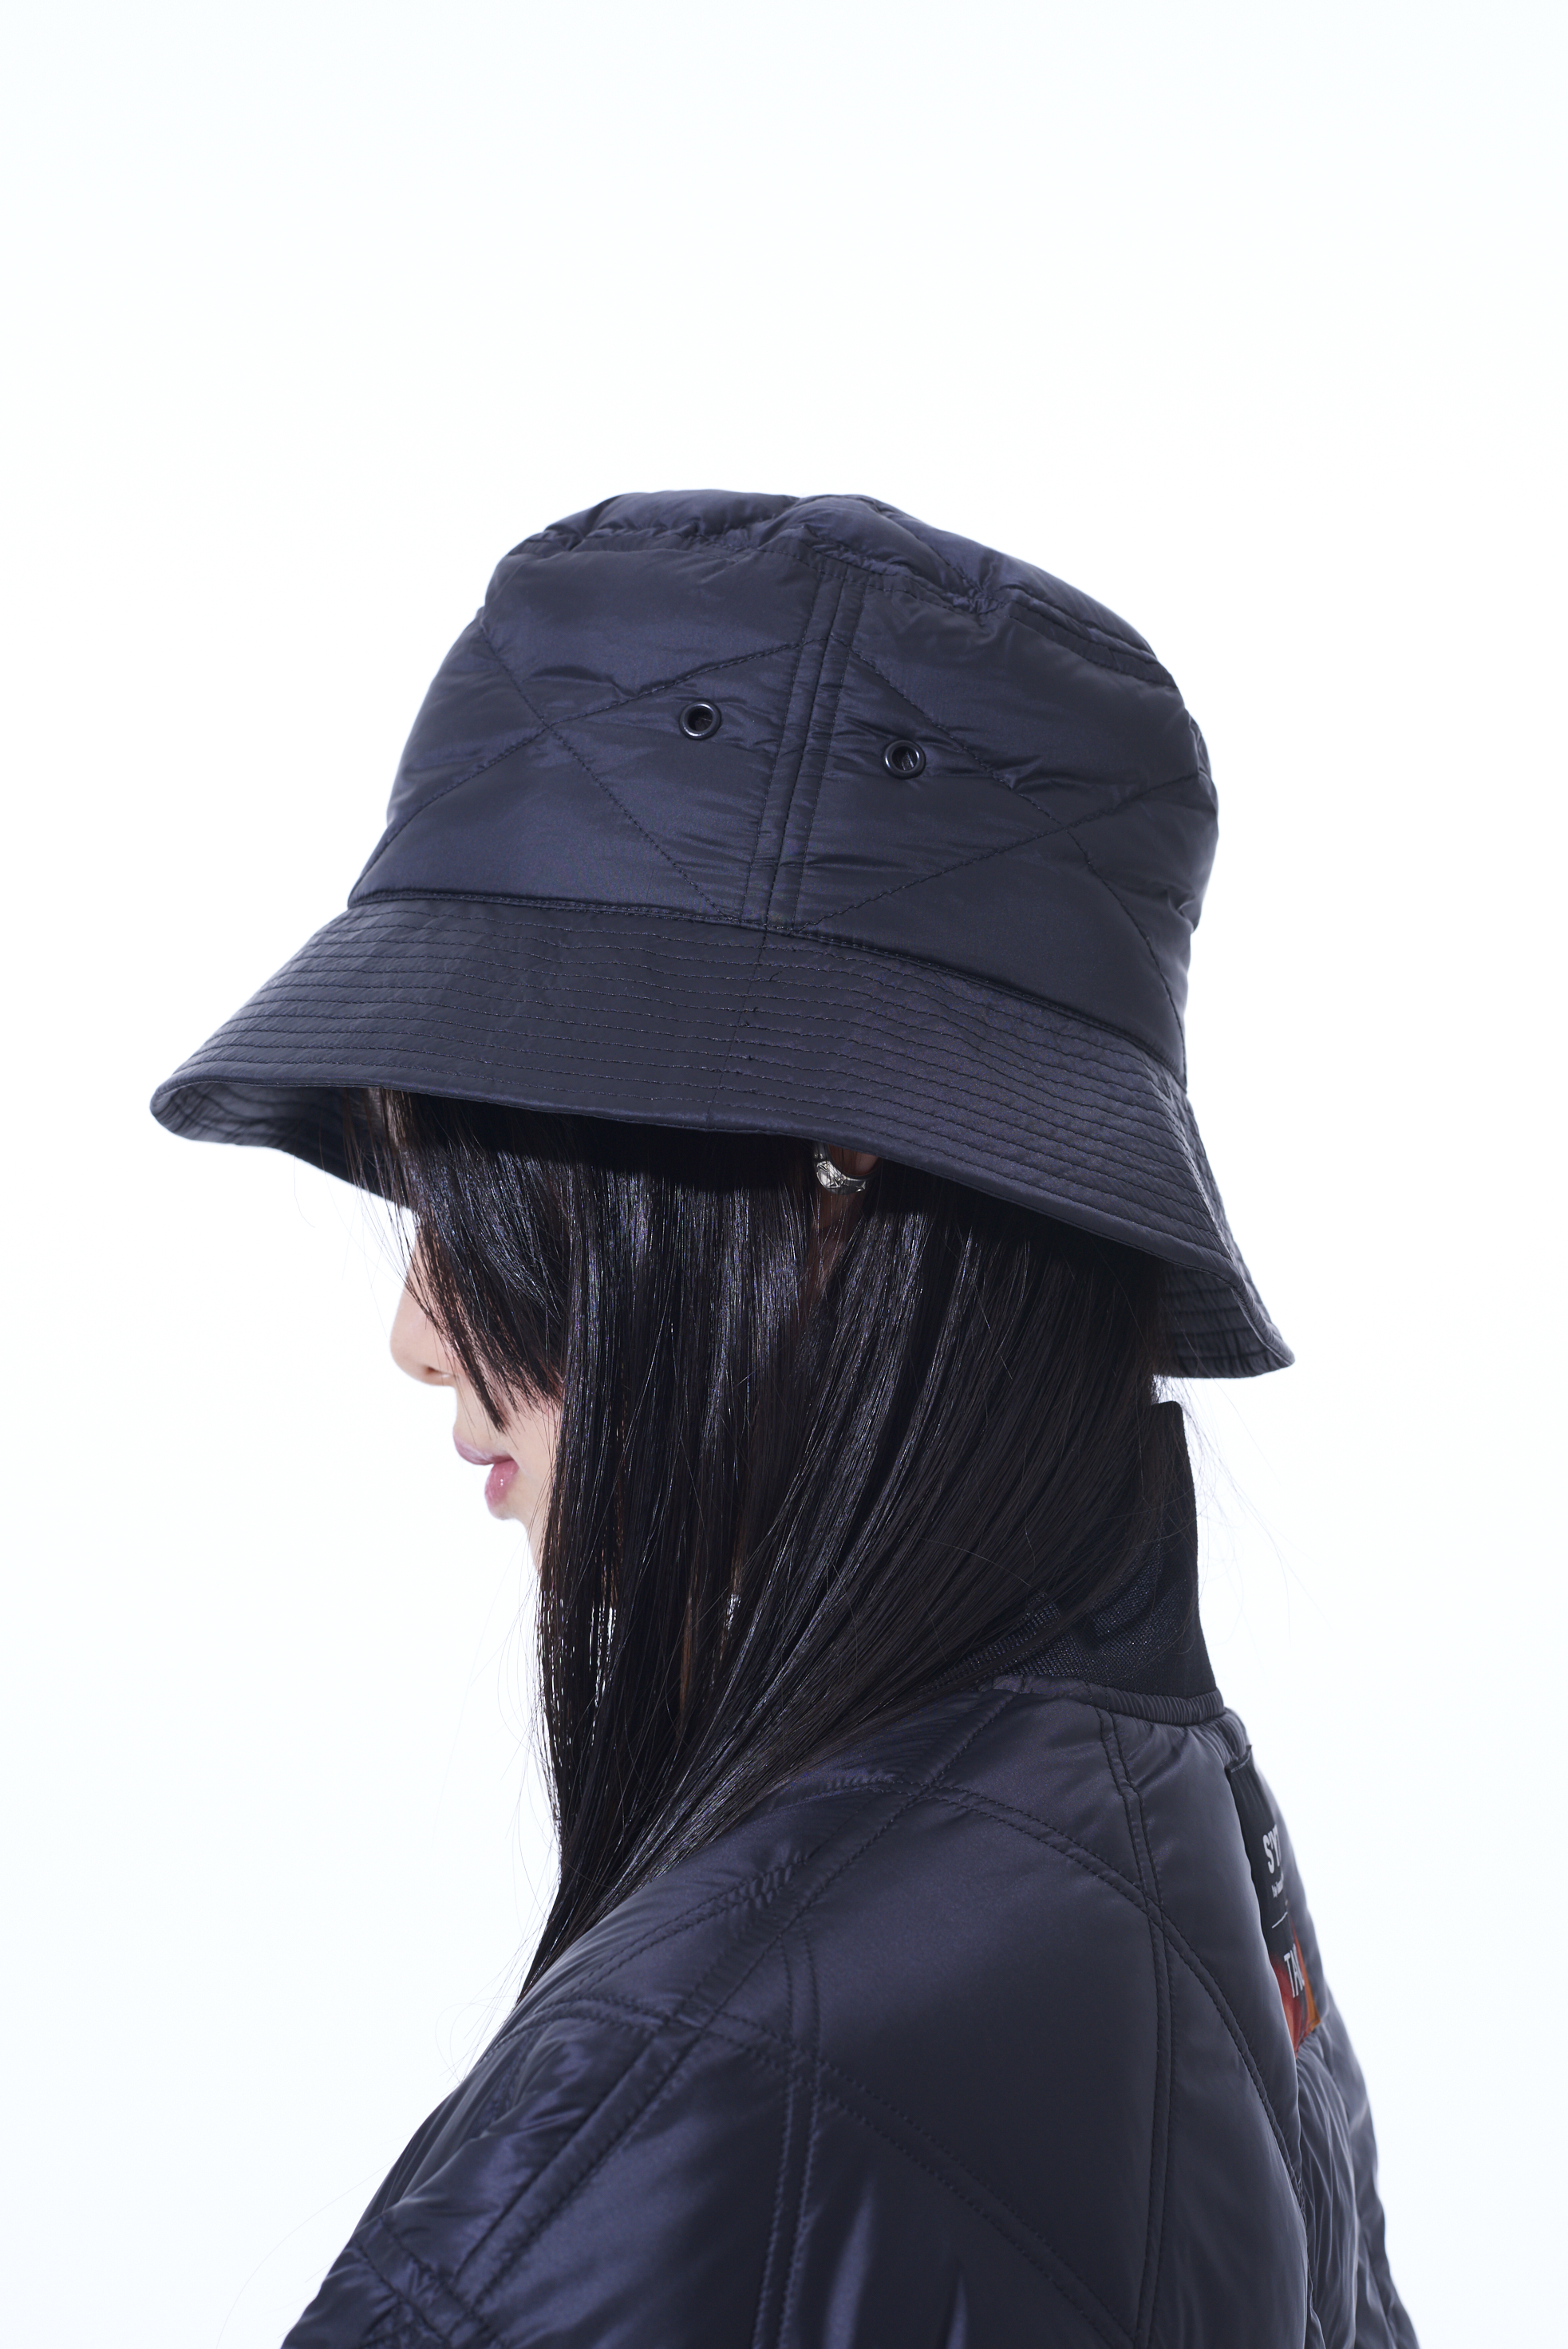 【S'YTE x TAION】Collaboration Collection QUILTED DOWN BUCKET HAT